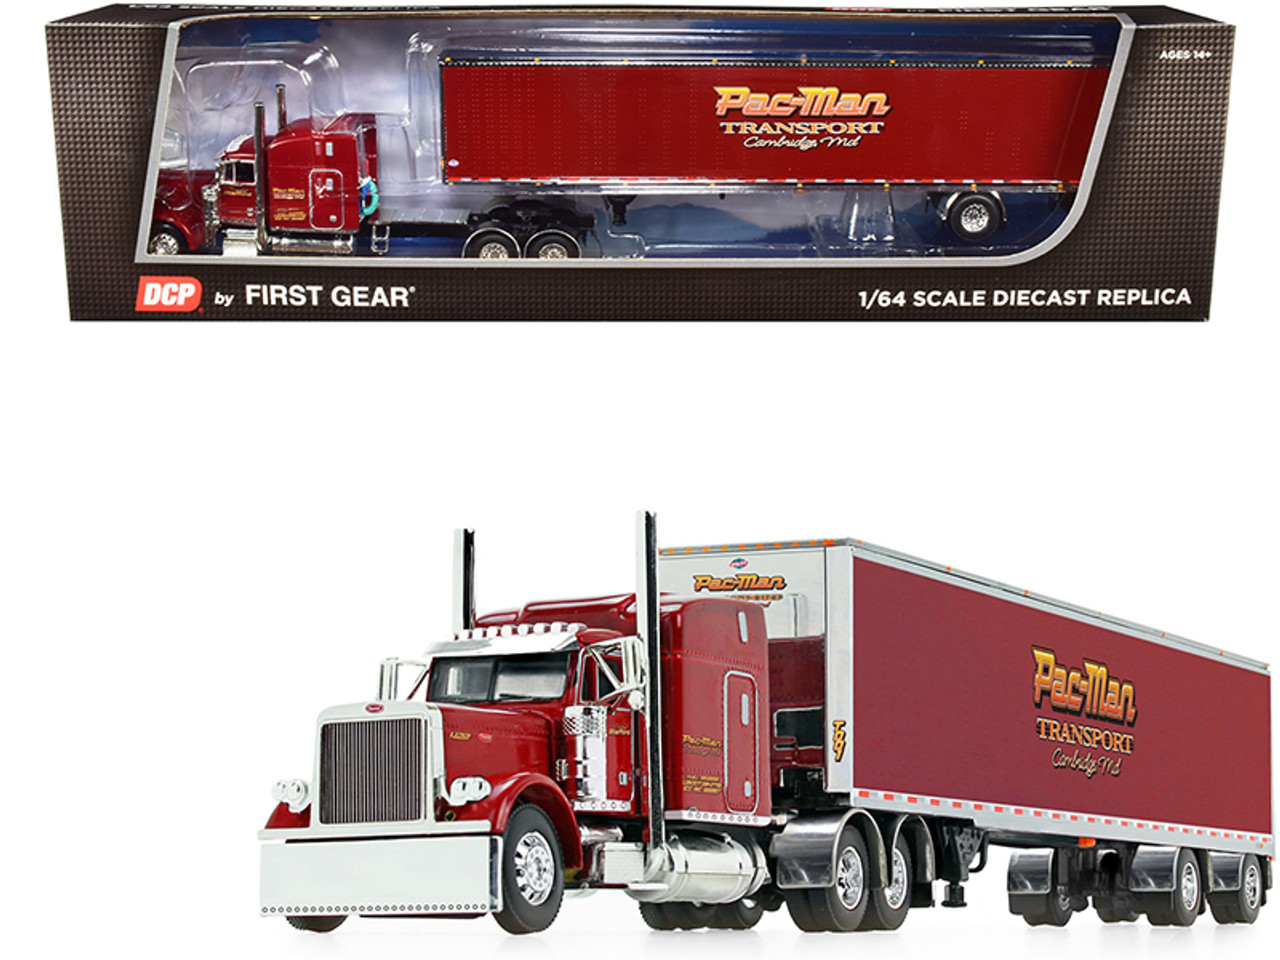 Peterbilt 379 63" Mid-Roof Sleeper Cab with 53' Utility Dry Goods Spread-Axle Trailer "Pac-Man Transport" Burgundy 1/64 Diecast Model by DCP/First Gear